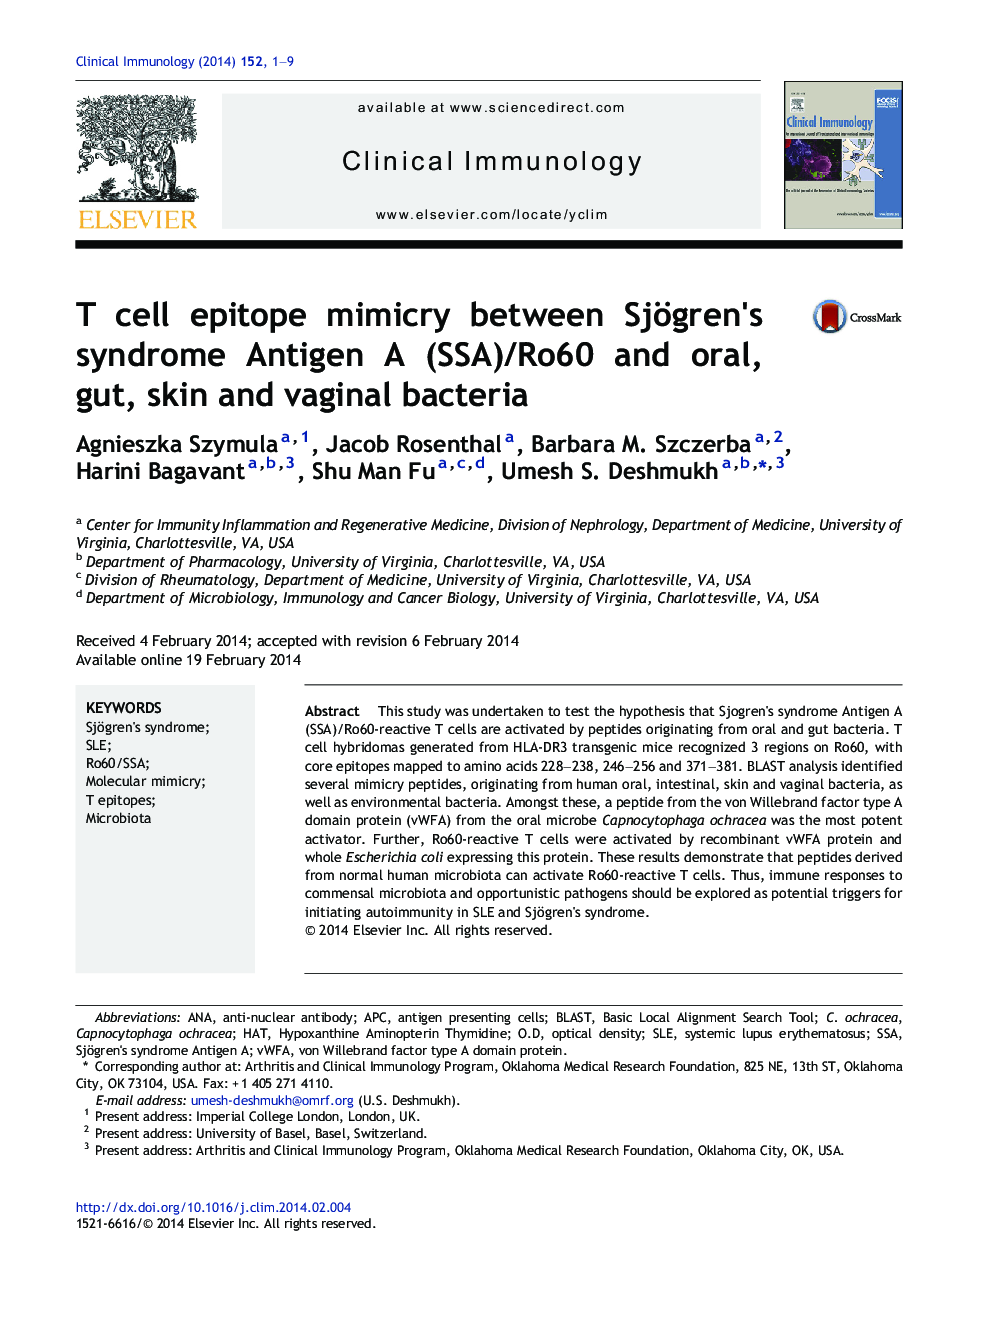 T cell epitope mimicry between Sjögren's syndrome Antigen A (SSA)/Ro60 and oral, gut, skin and vaginal bacteria